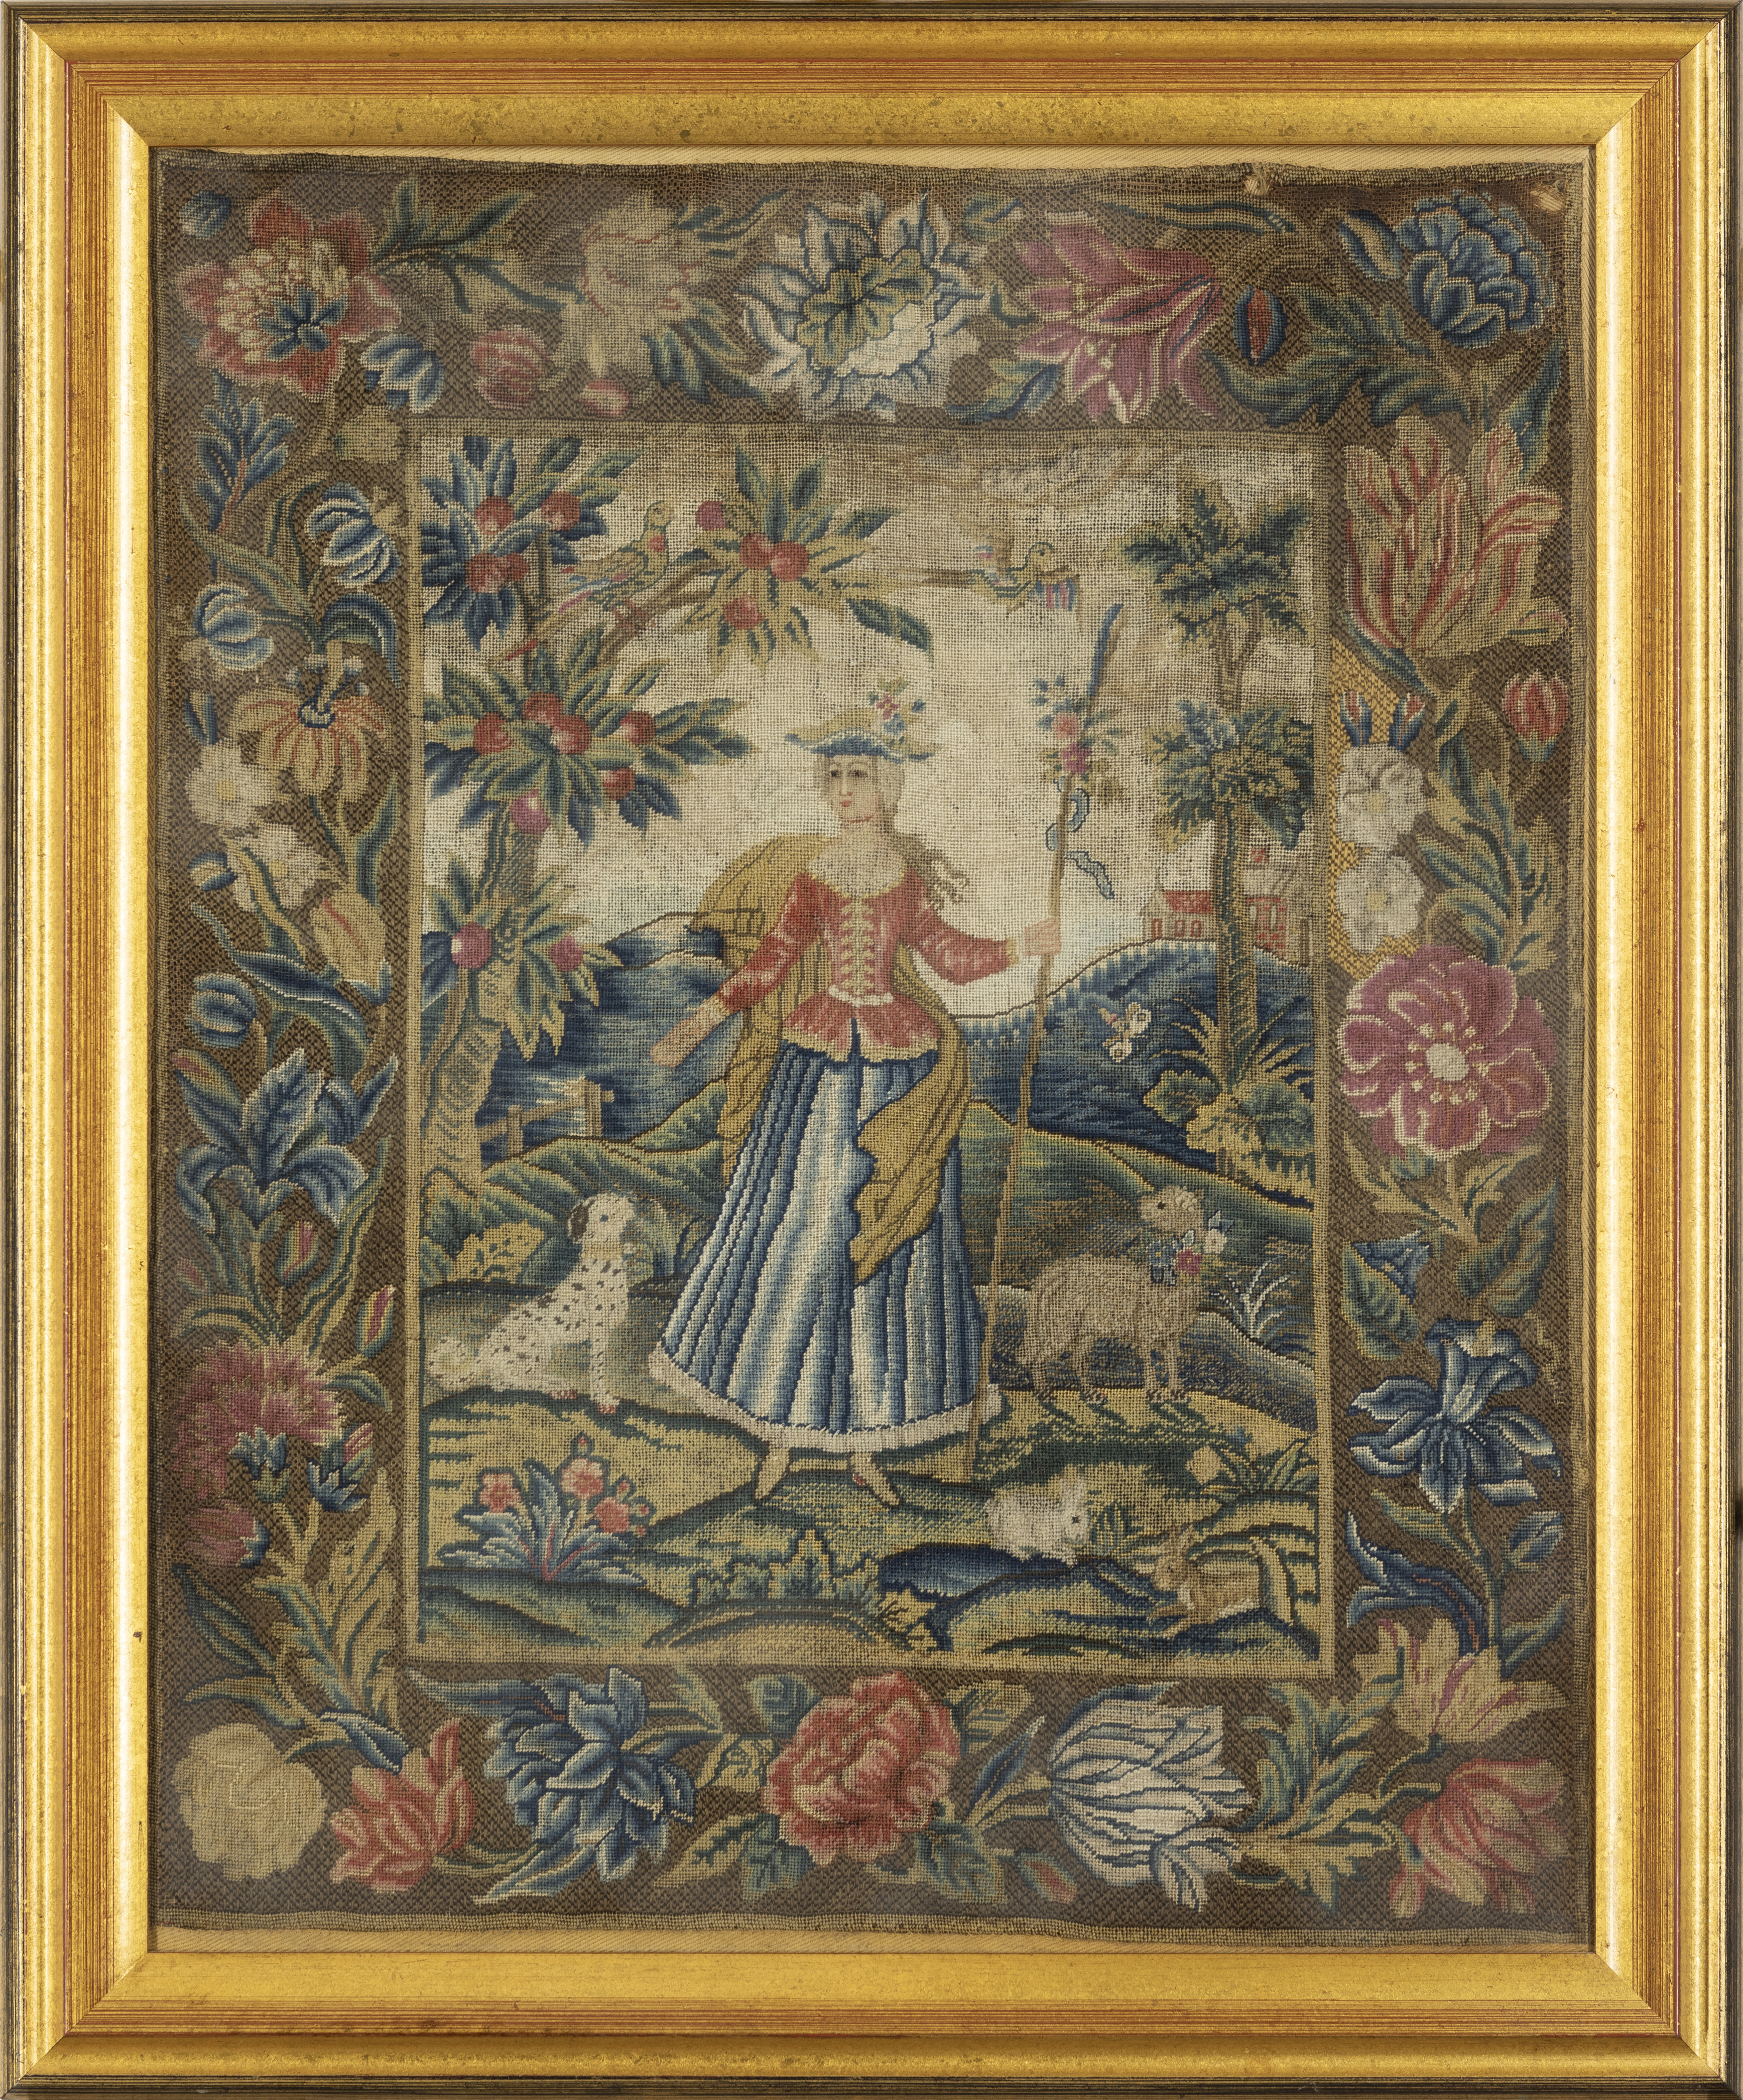 An English needlework panel, Early 18th century,  Worked in wools and silks, depicting a shepherd... - Image 2 of 2